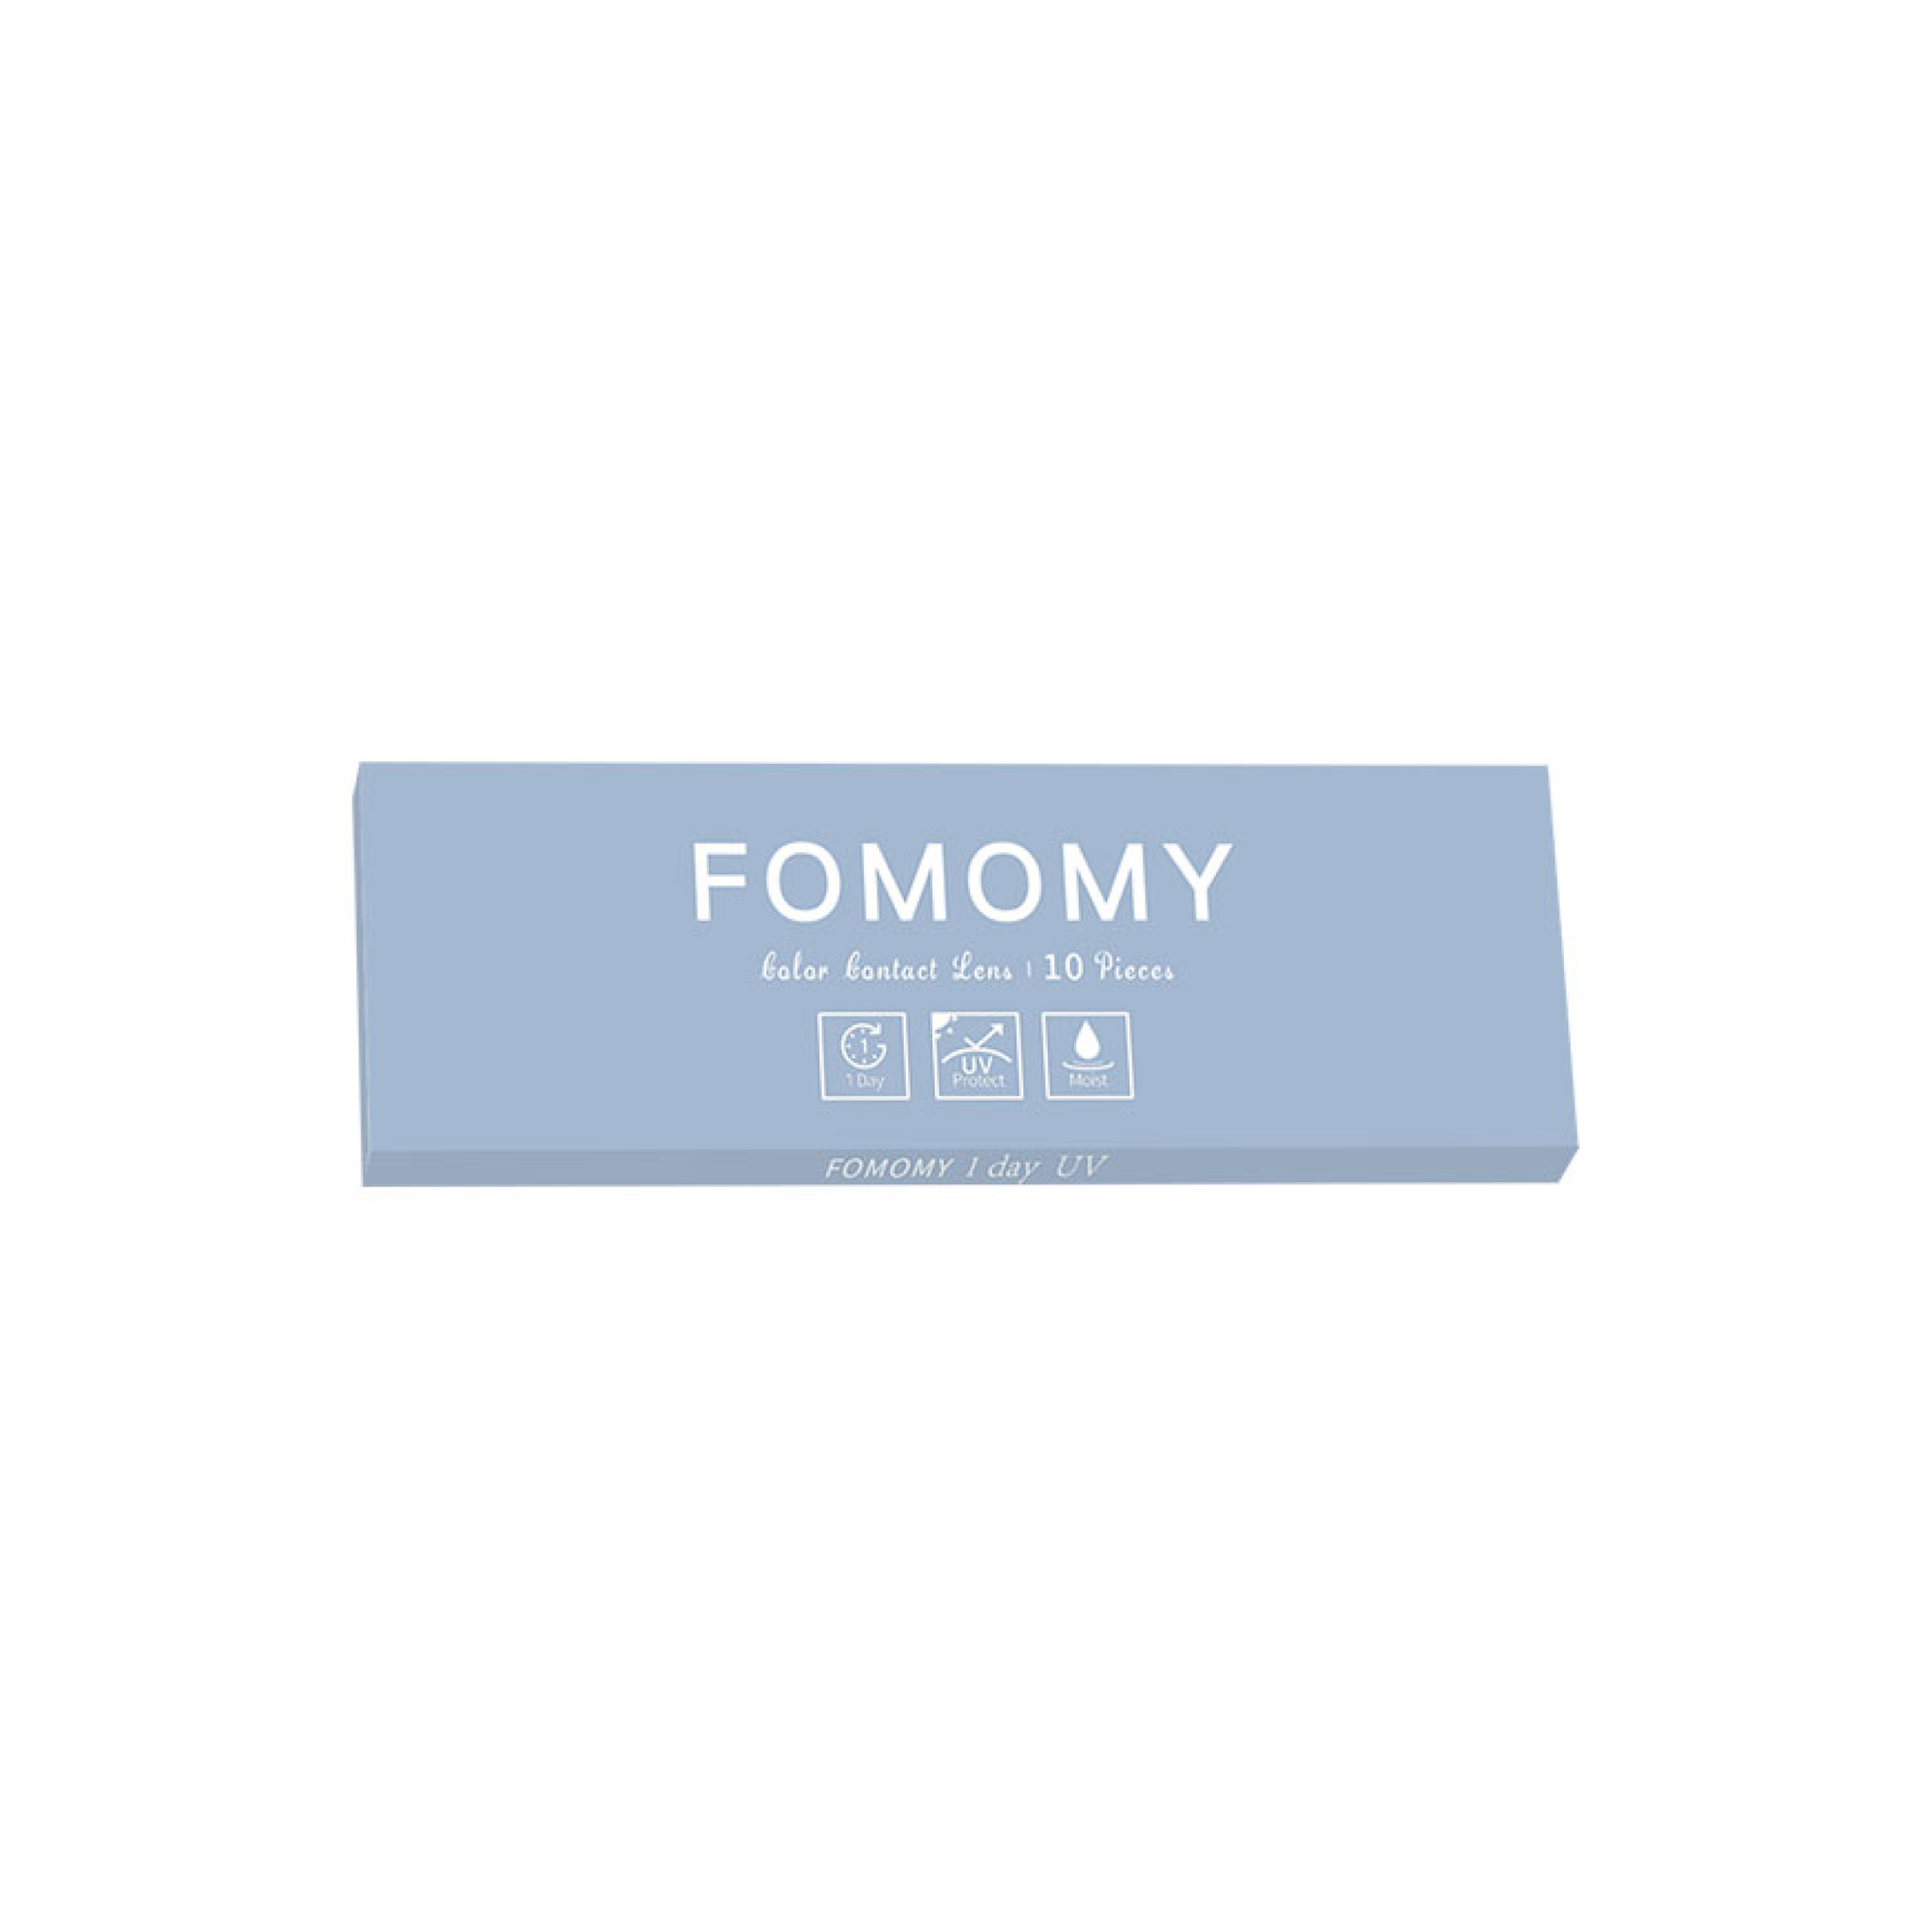 Fomomy 1-Day color contact lens #Cheese日抛美瞳芝士灰｜10 Pcs